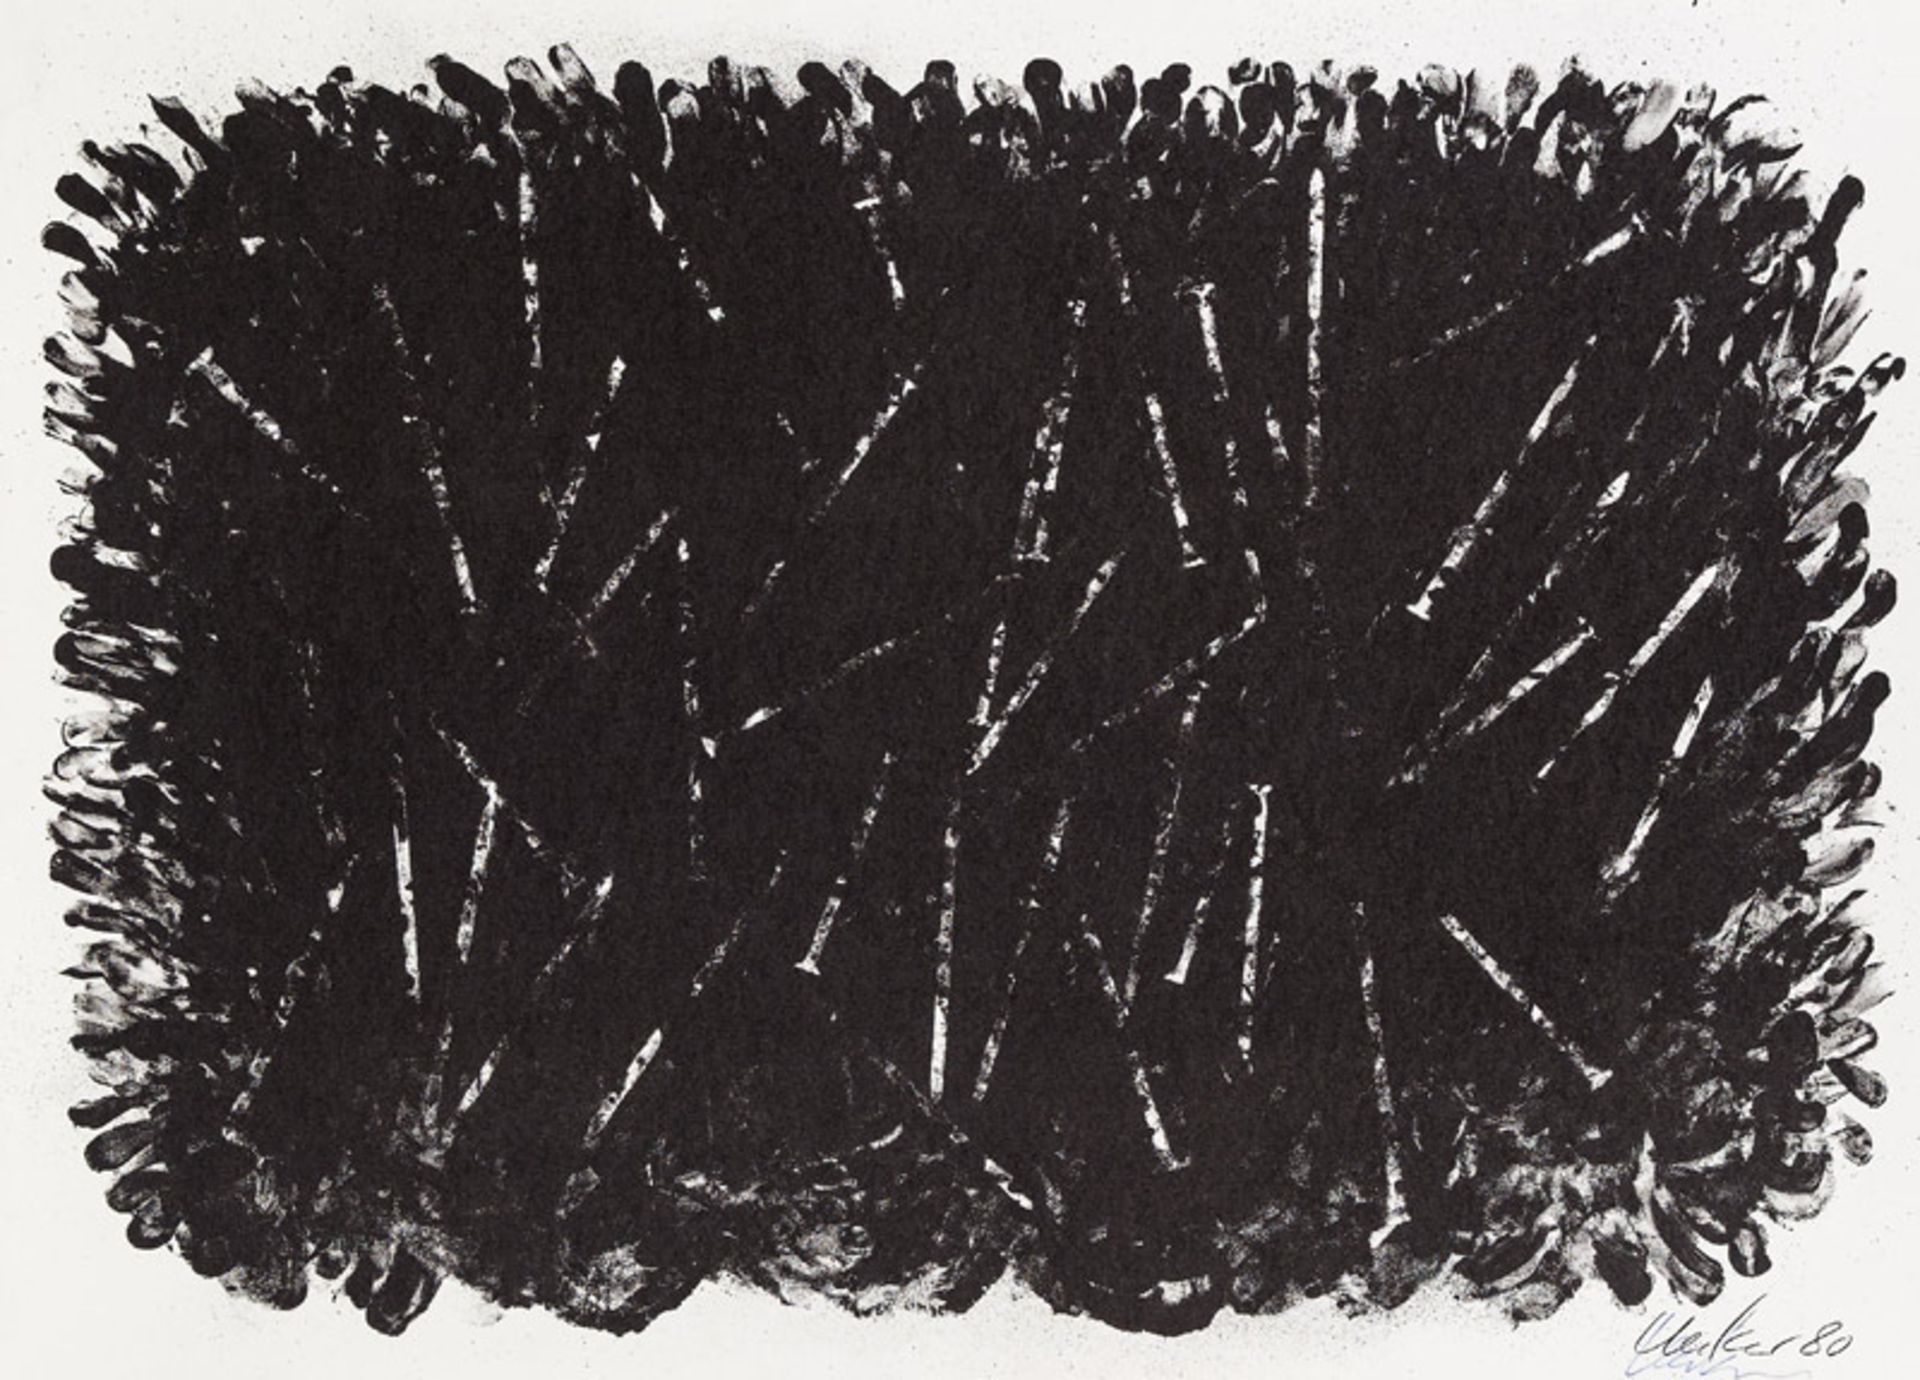 Günther Uecker *Untitled, 1980 lithograph on paper; unframed; 67.5 × 49.5 cm  Günther Uecker *o.